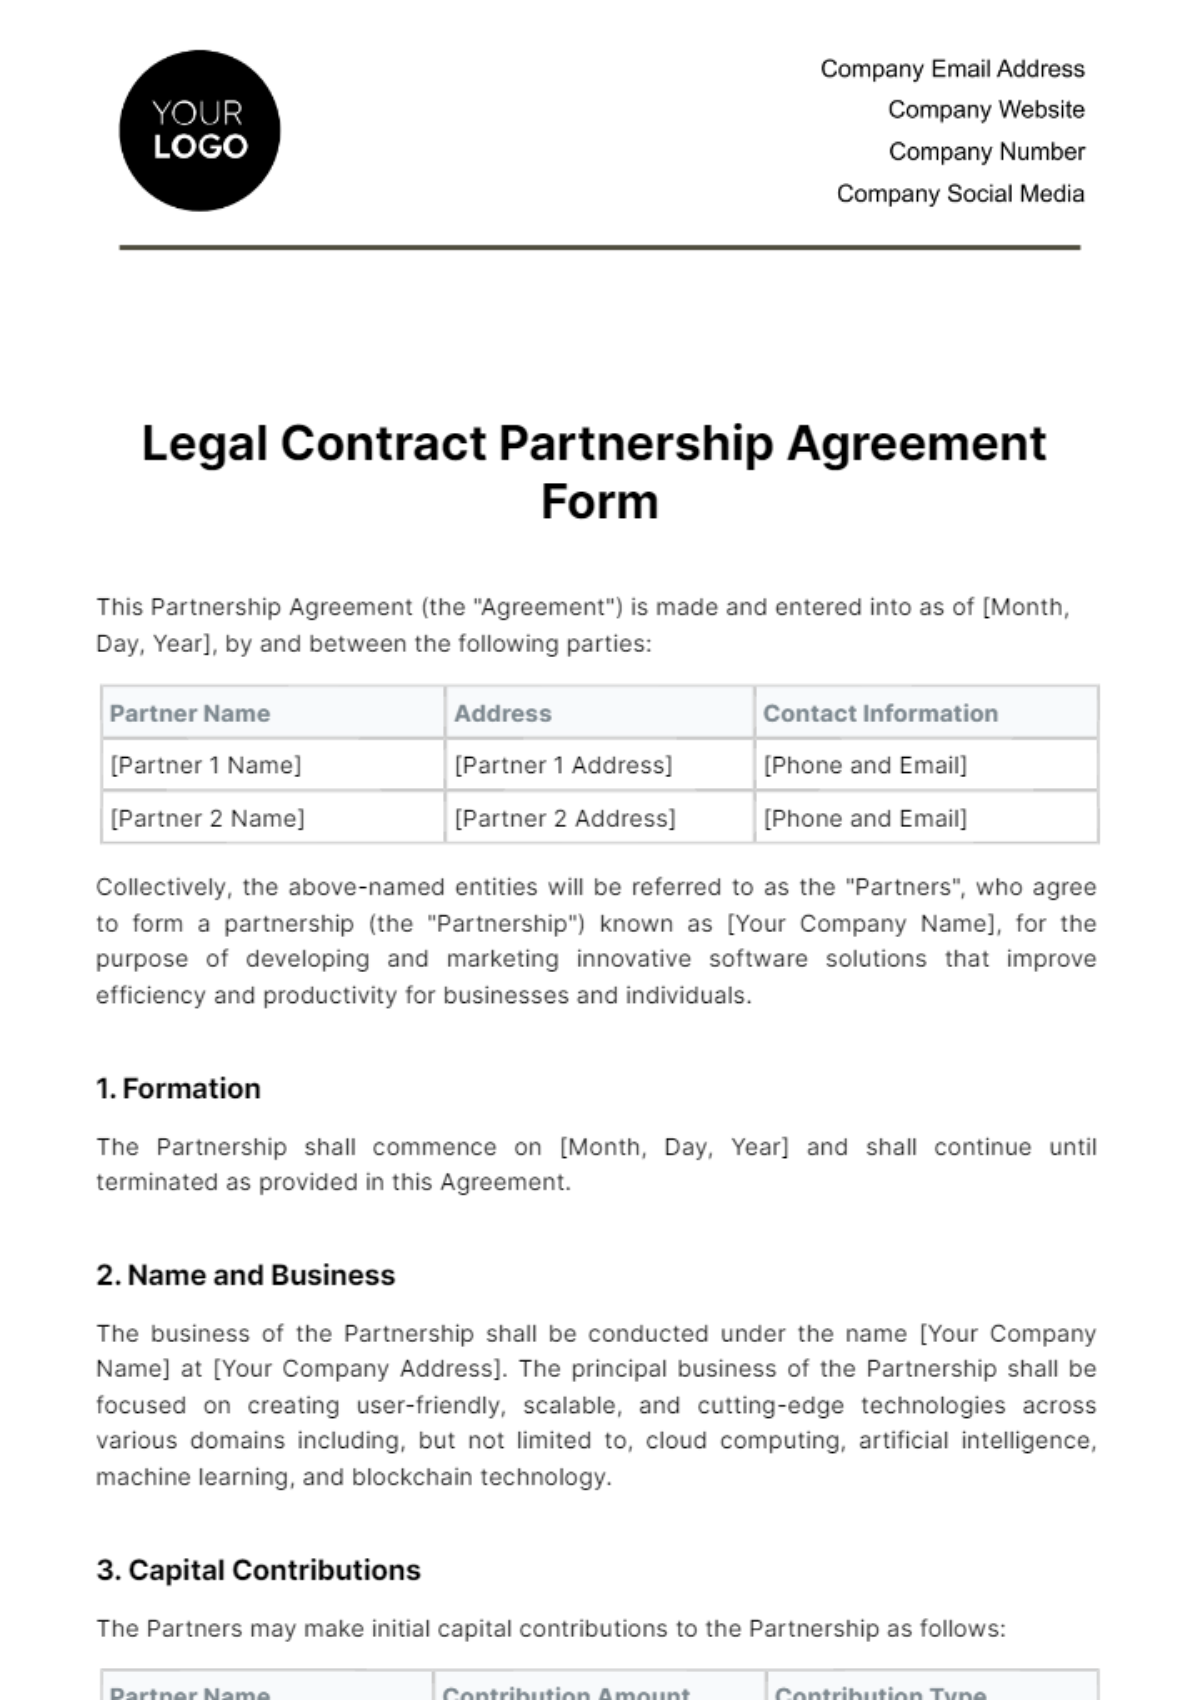 Legal Contract Partnership Agreement Form Template